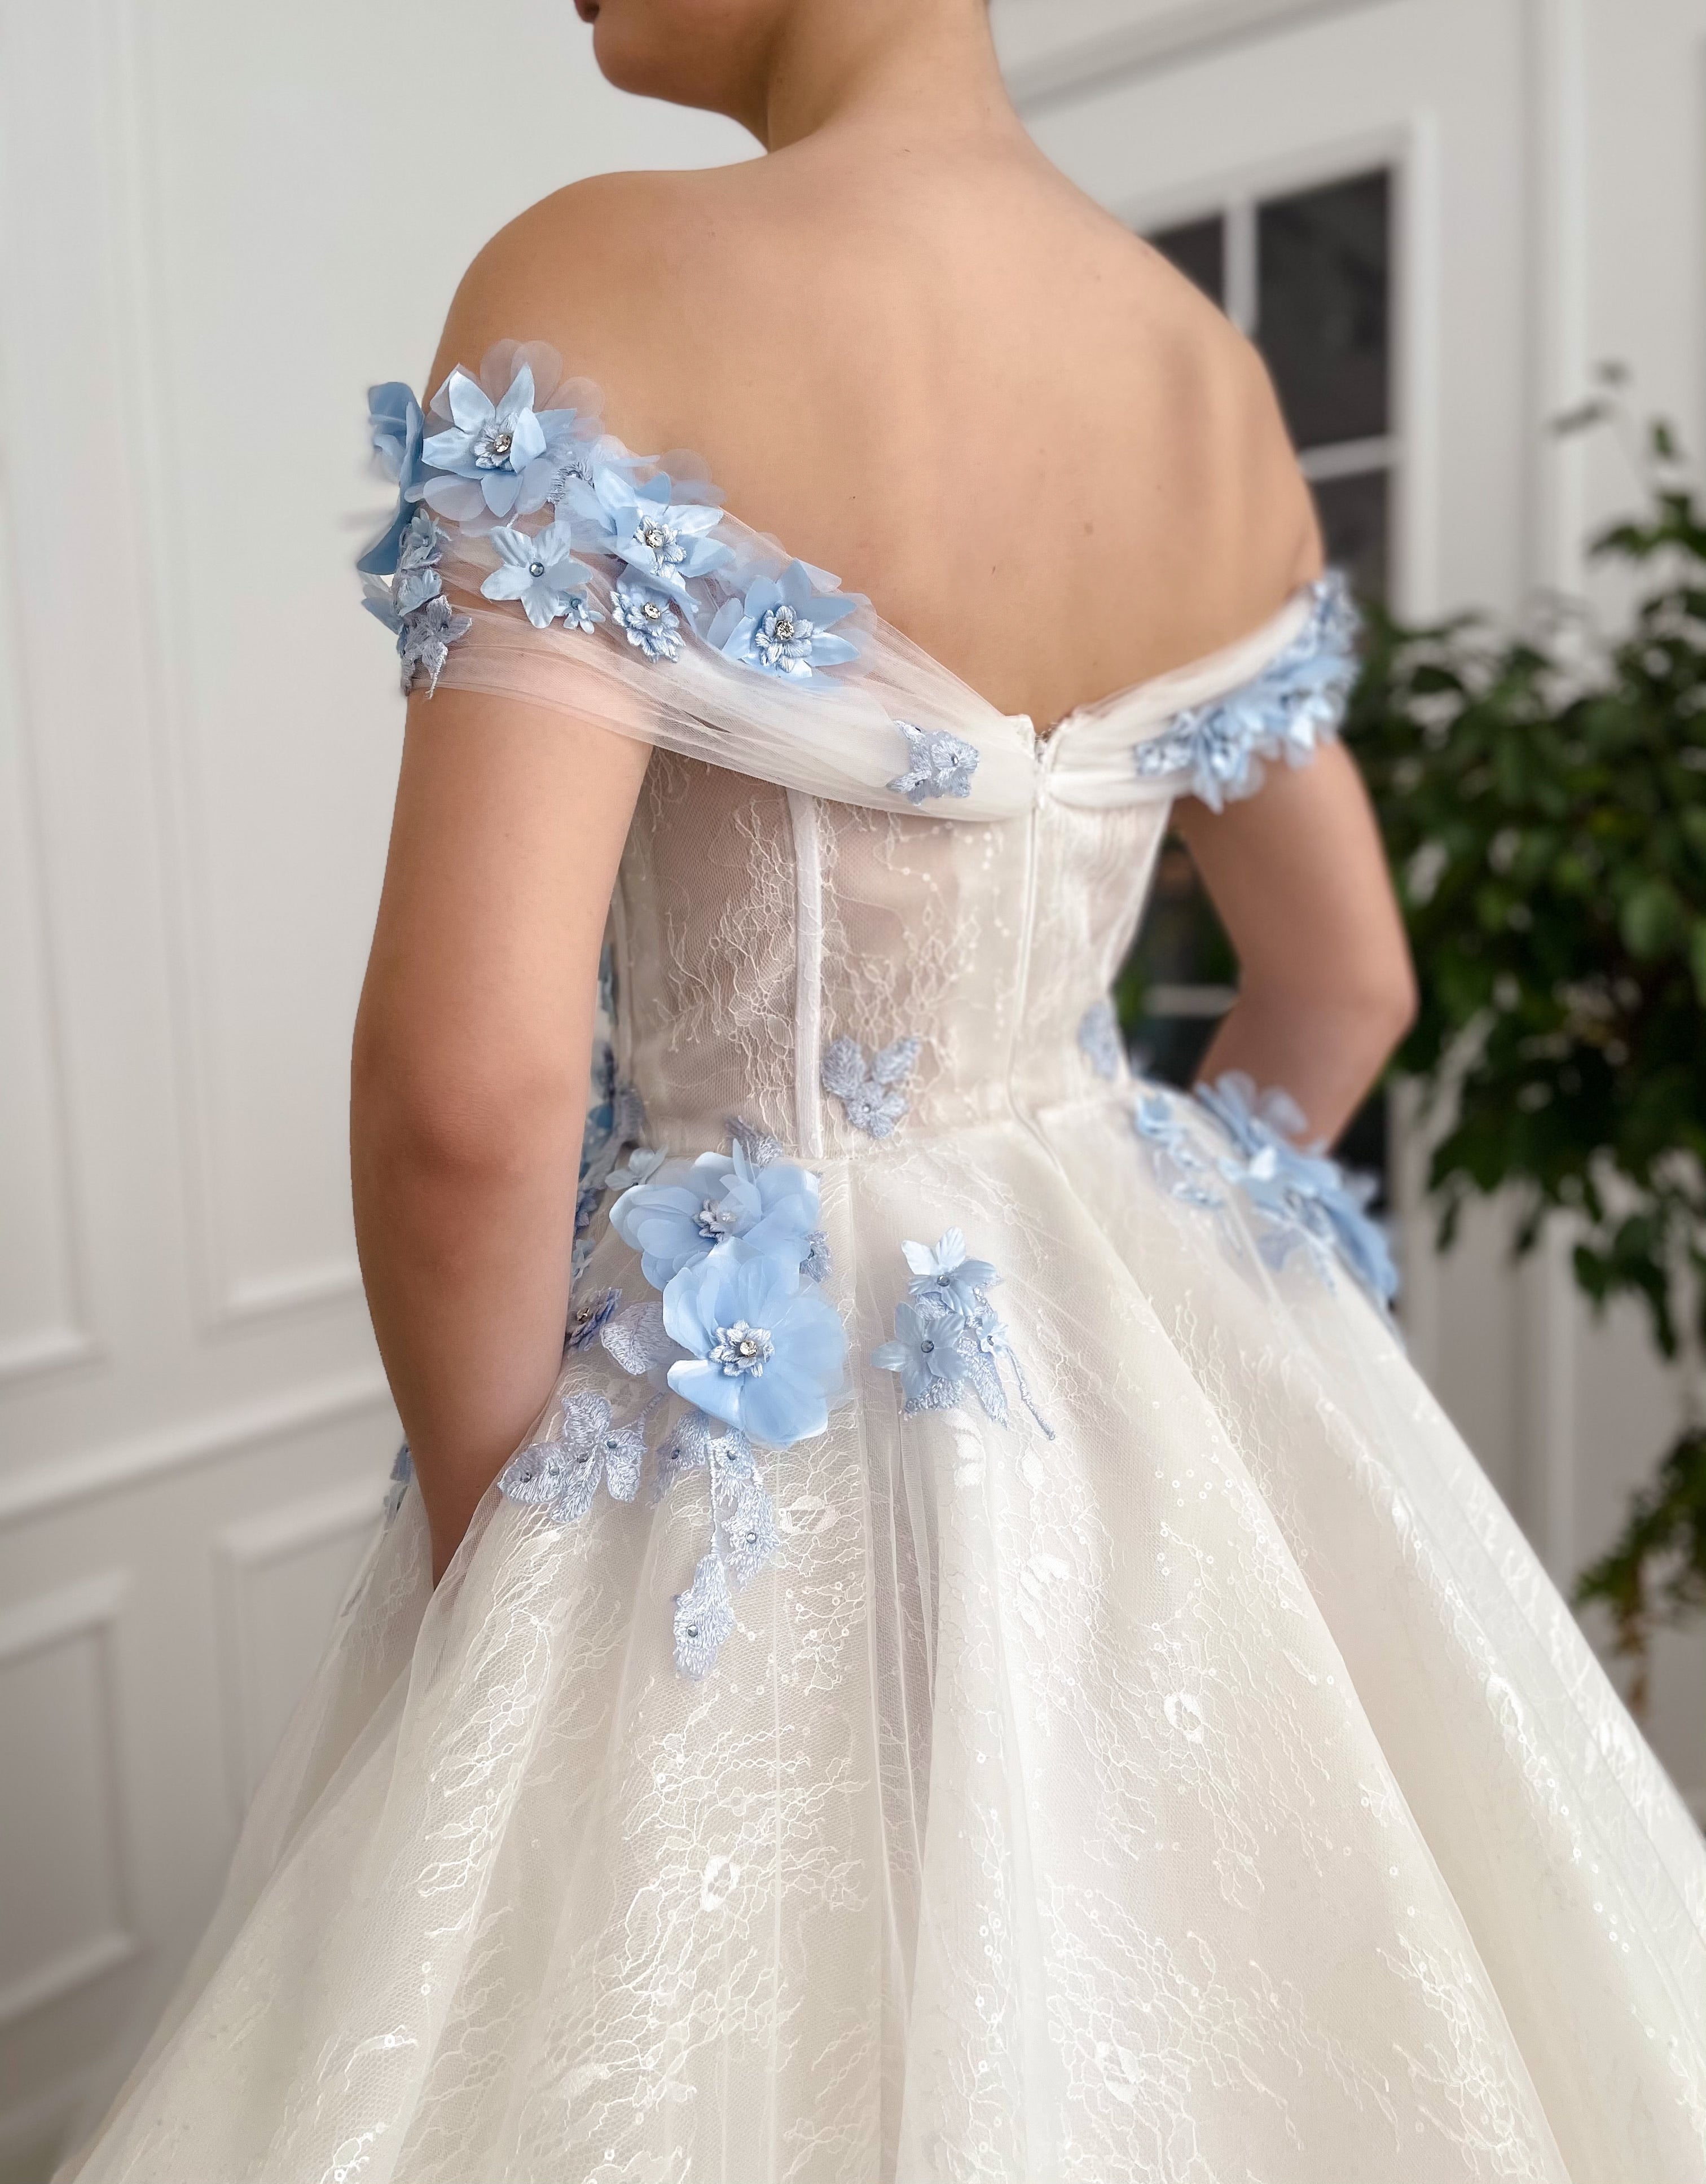 A line white bridal dress with off the shoulder sleeves and embroidered blue flowers